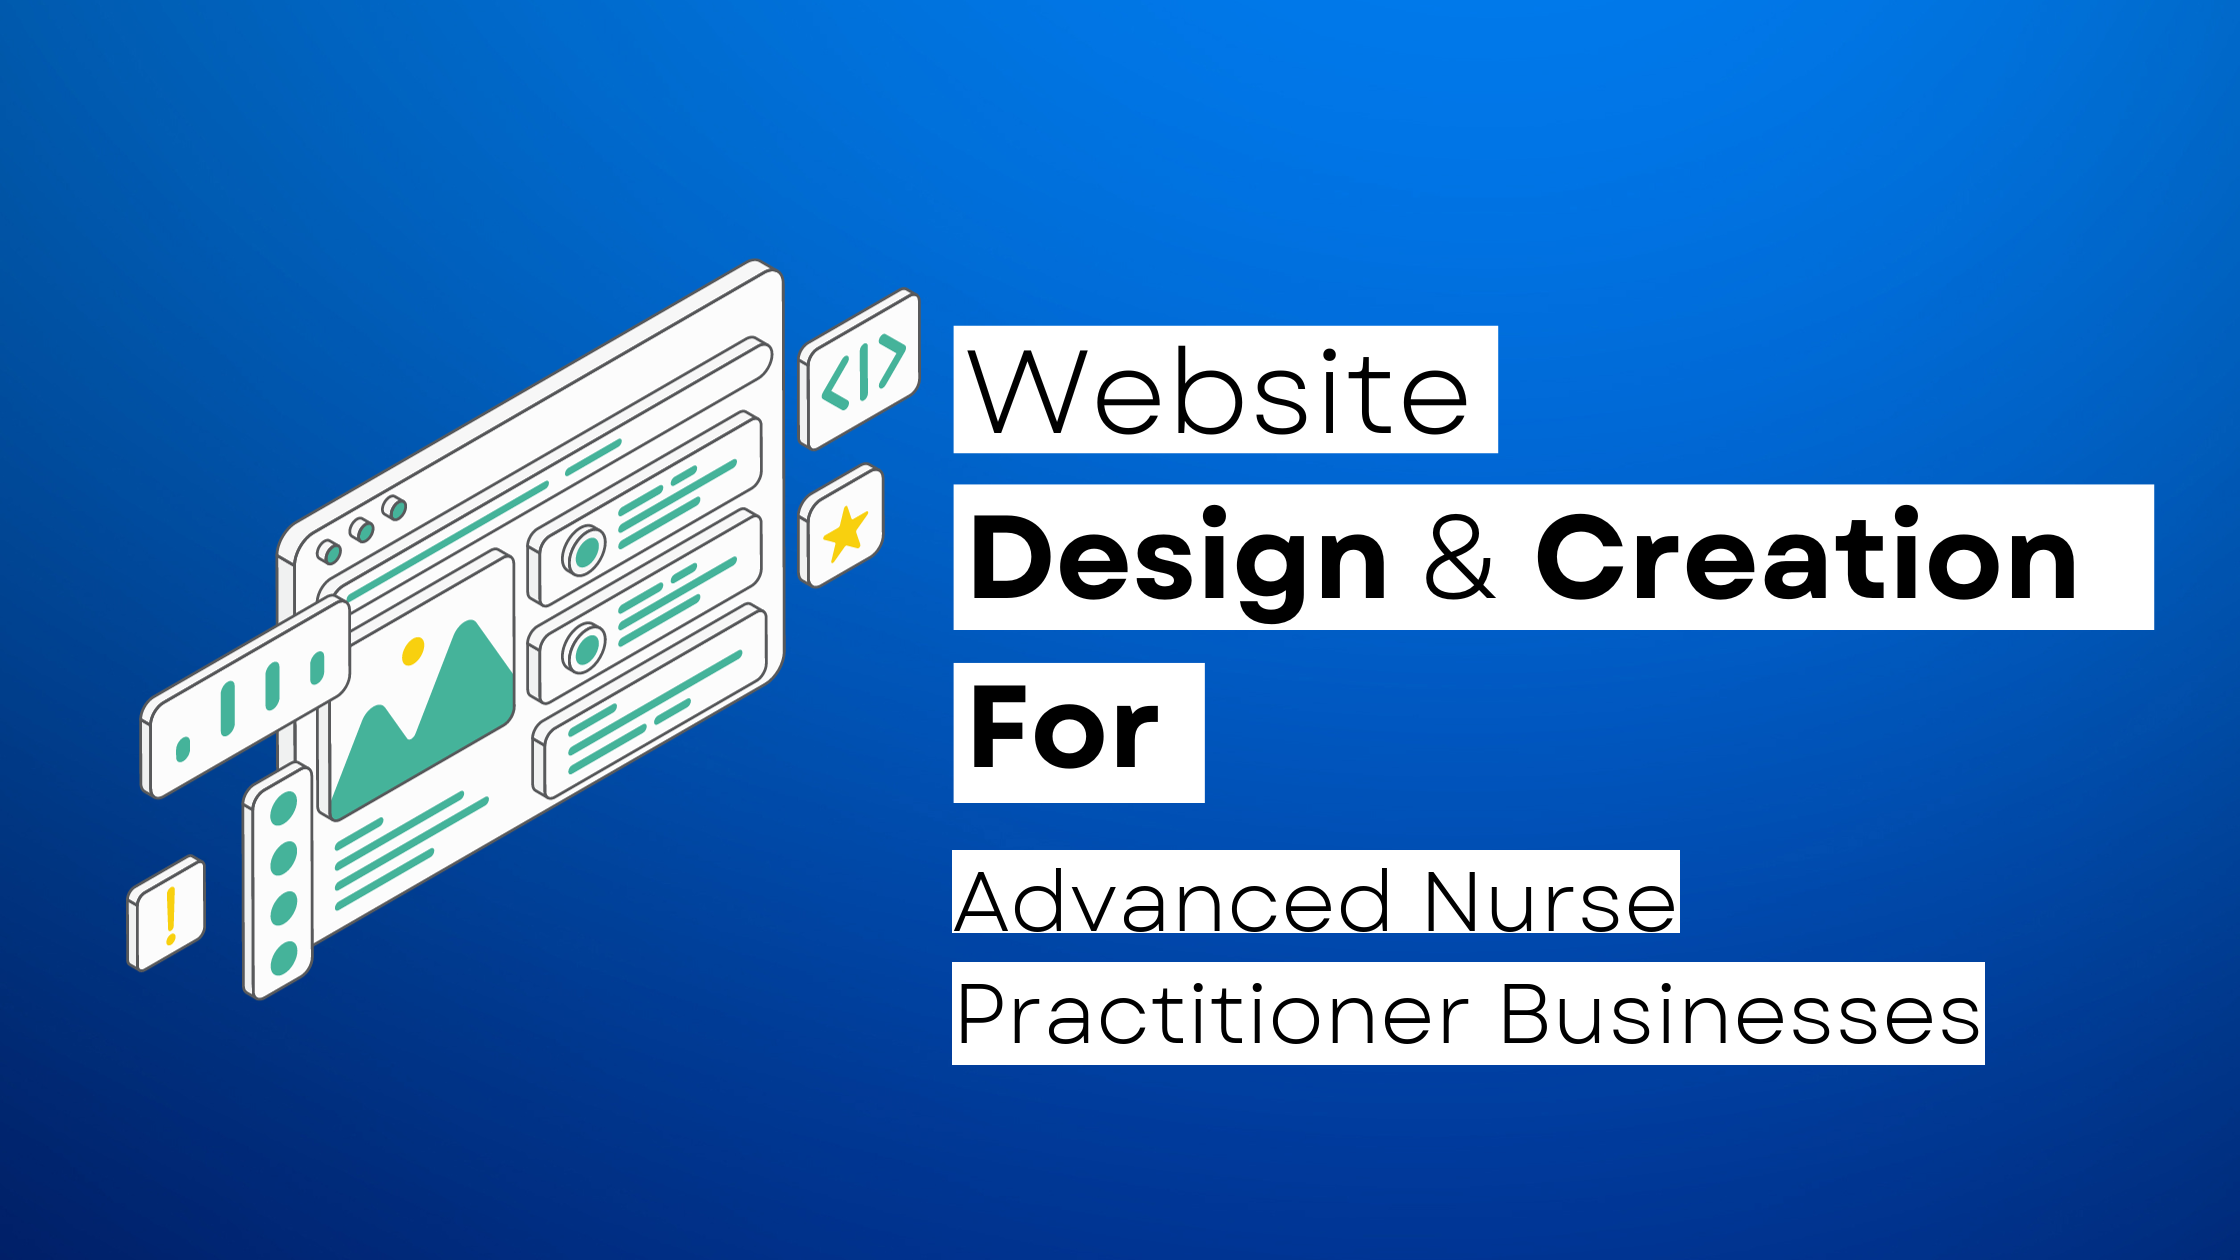 How to start a Advanced Nurse Practitioner website